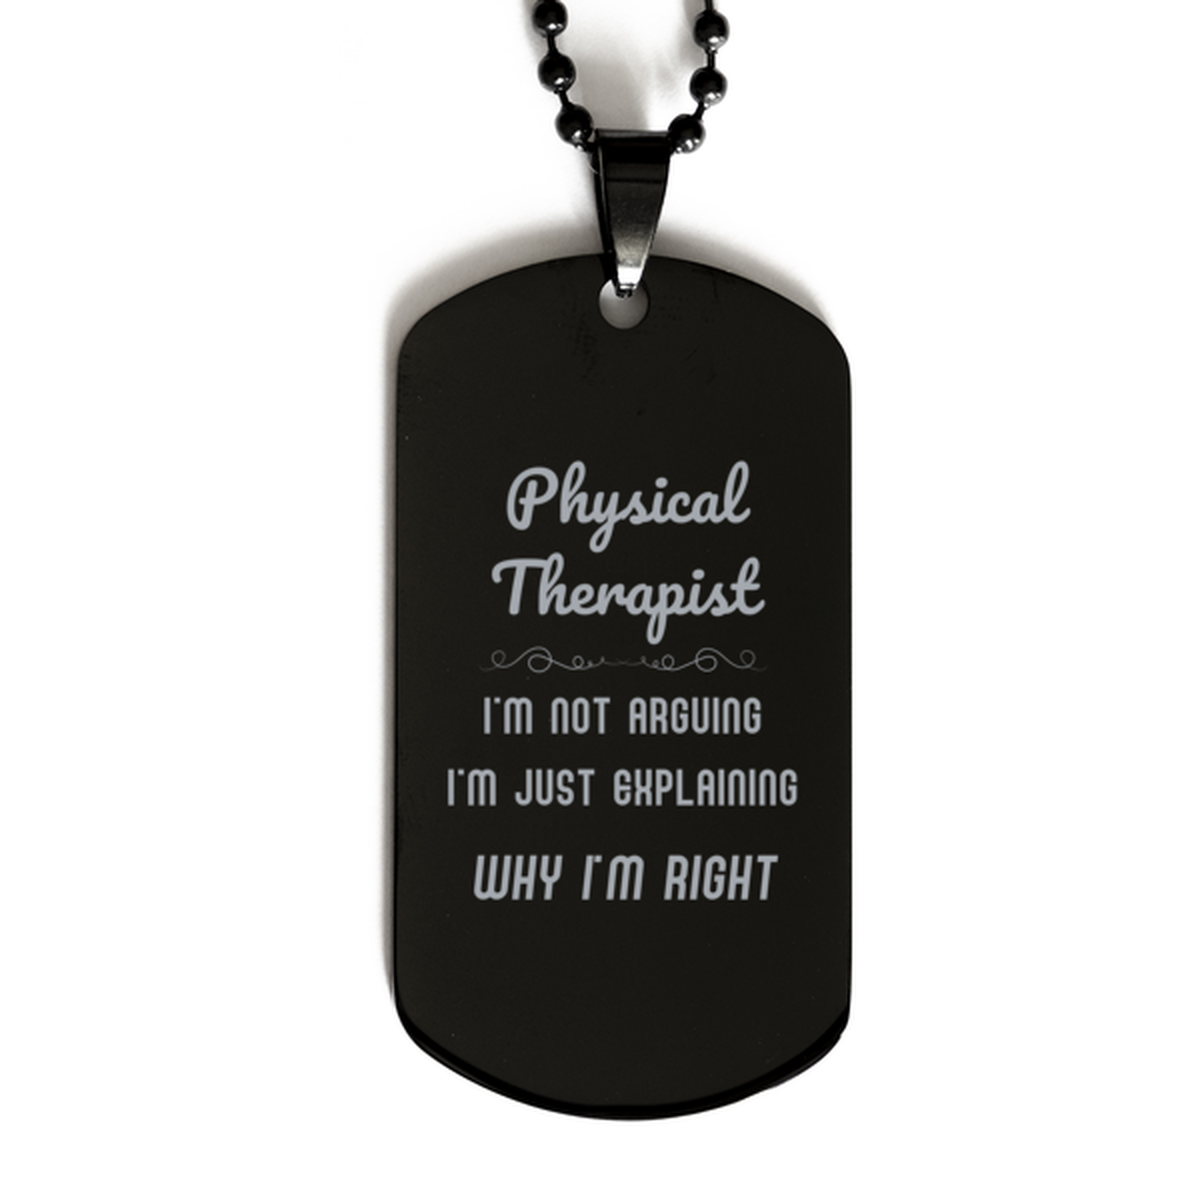 Physical Therapist I'm not Arguing. I'm Just Explaining Why I'm RIGHT Black Dog Tag, Funny Saying Quote Physical Therapist Gifts For Physical Therapist Graduation Birthday Christmas Gifts for Men Women Coworker